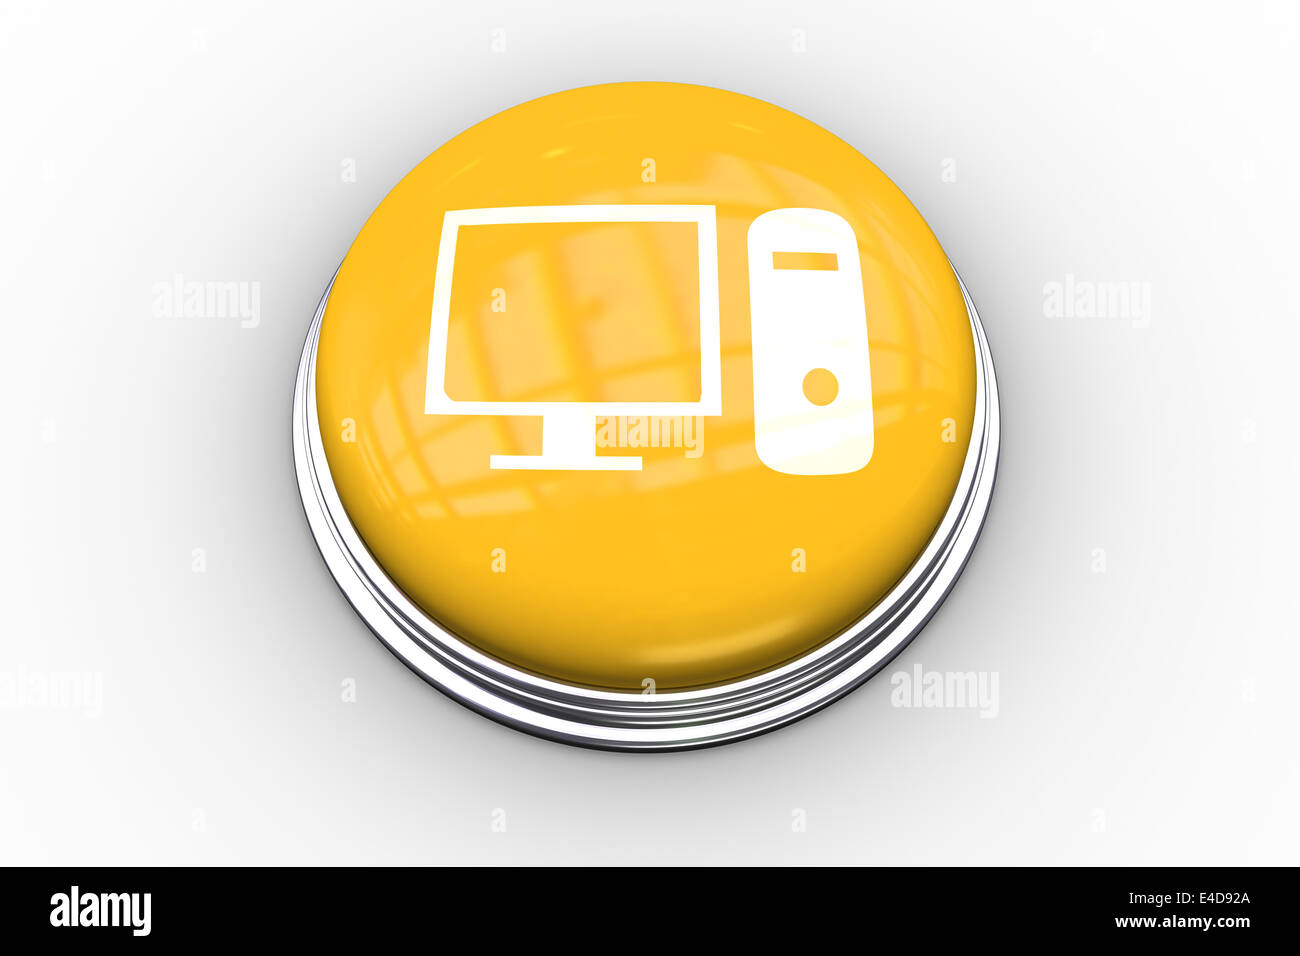 Composite image of computer graphic on button Stock Photo